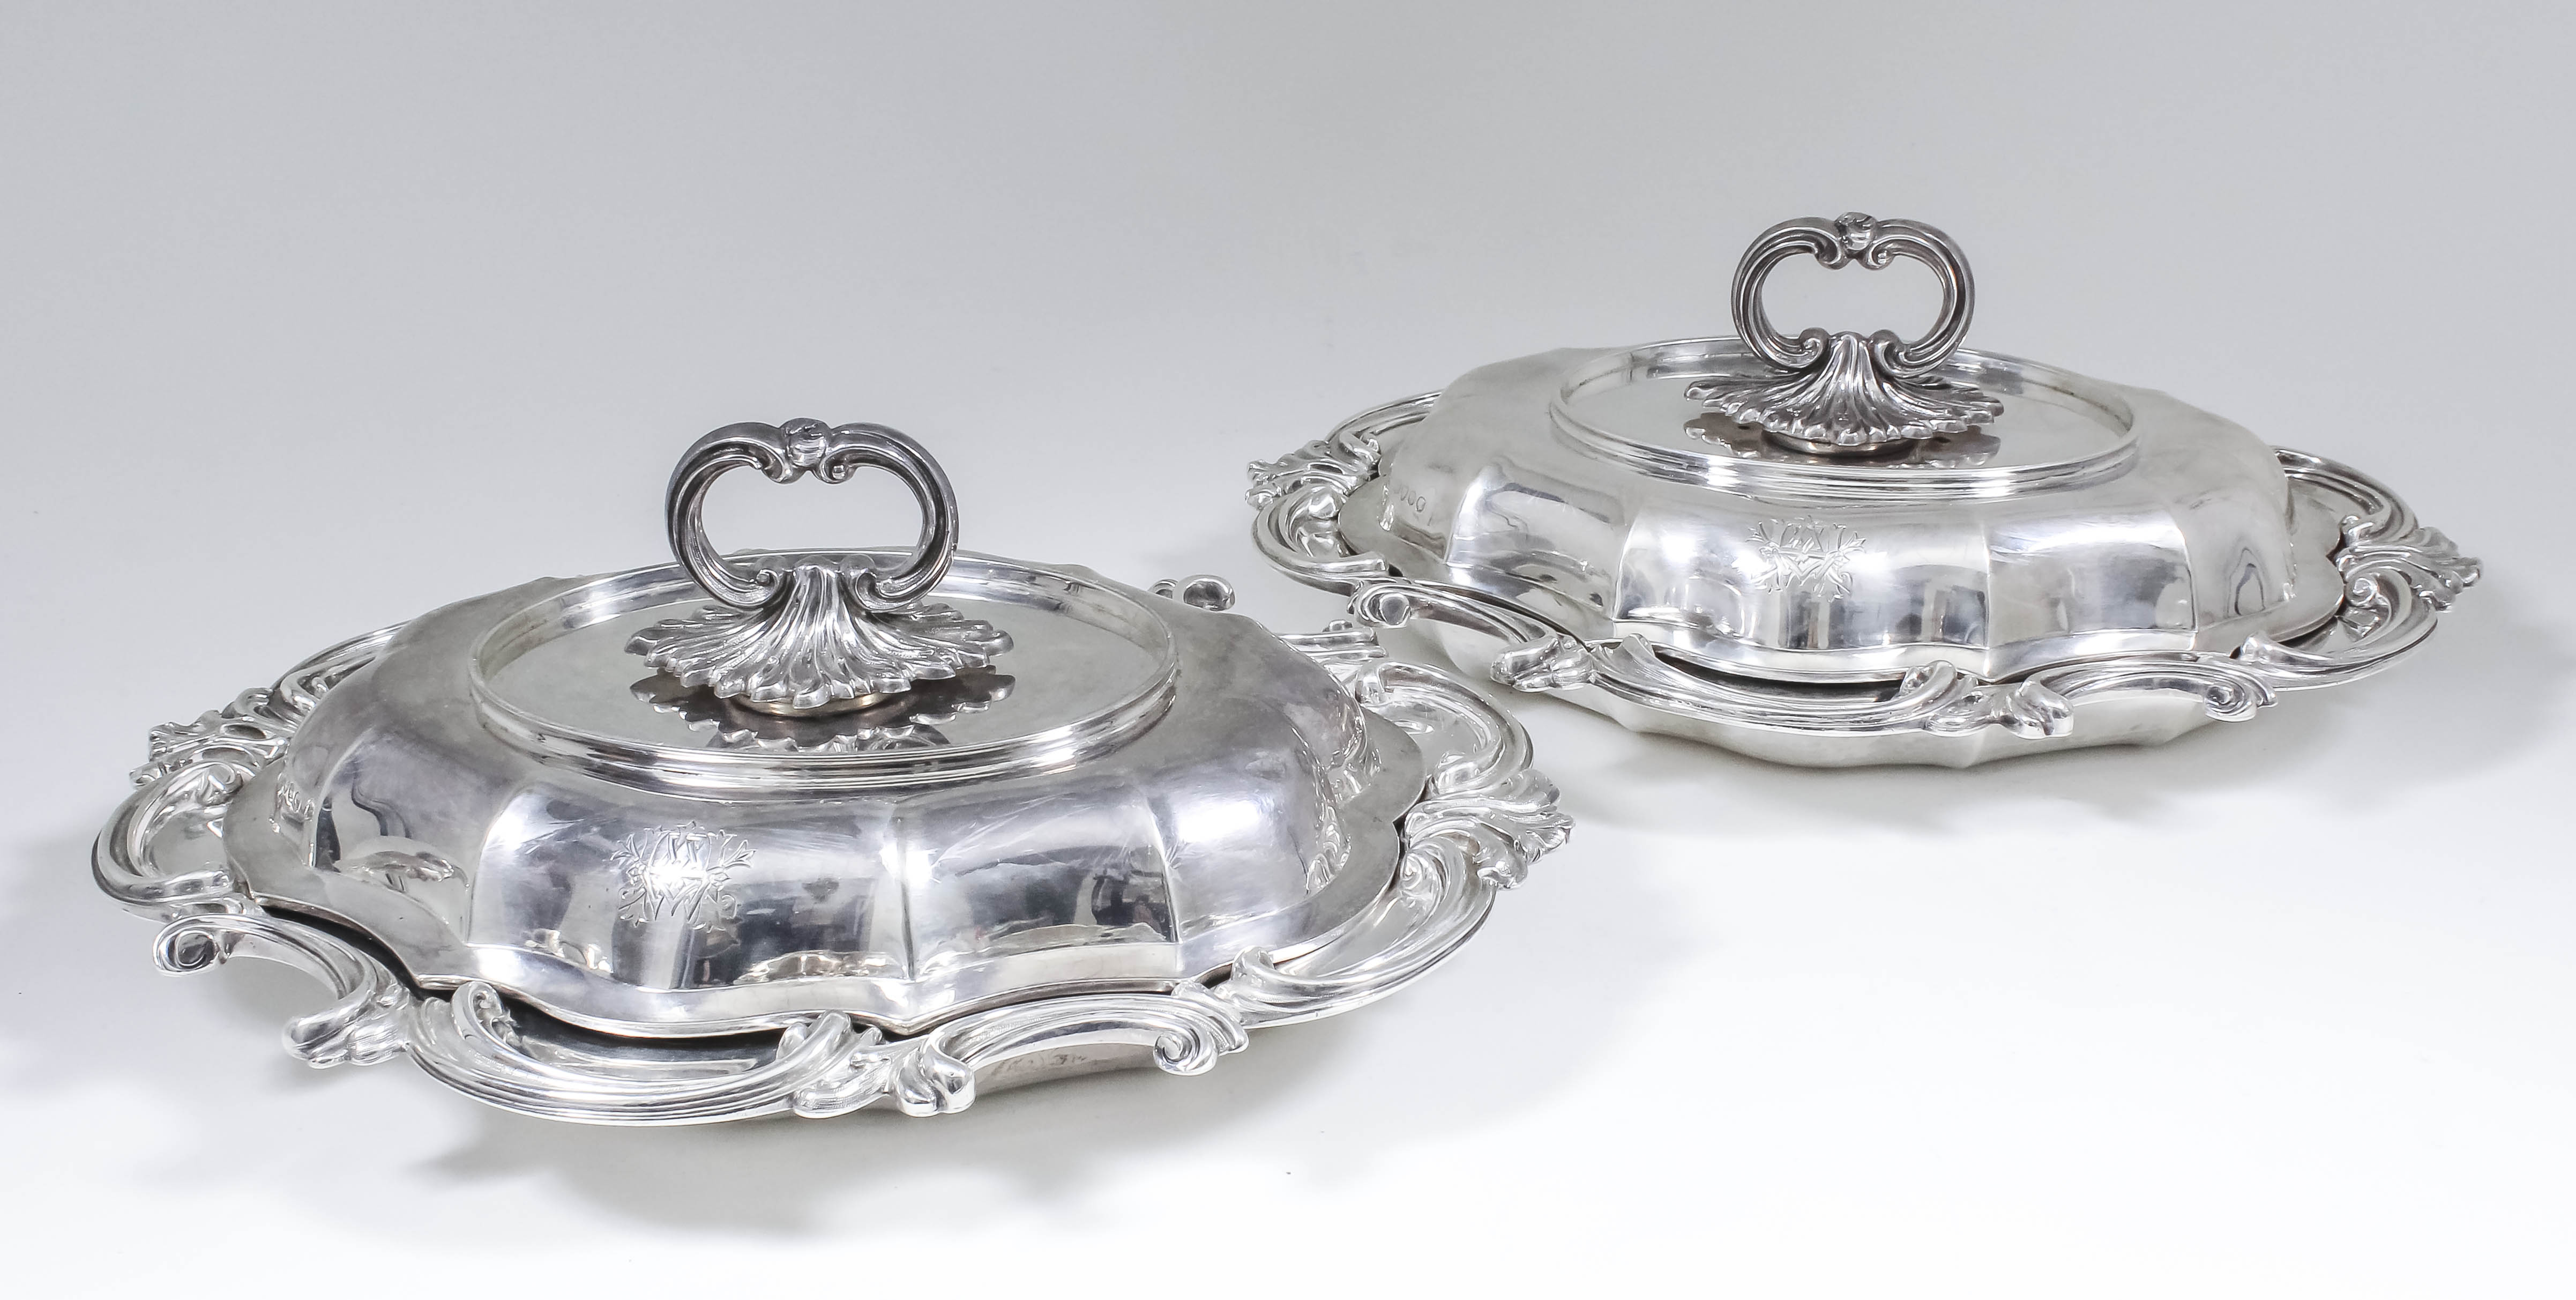 A pair of Victorian silver oval entree dishes and covers of shaped and moulded outlines with bold